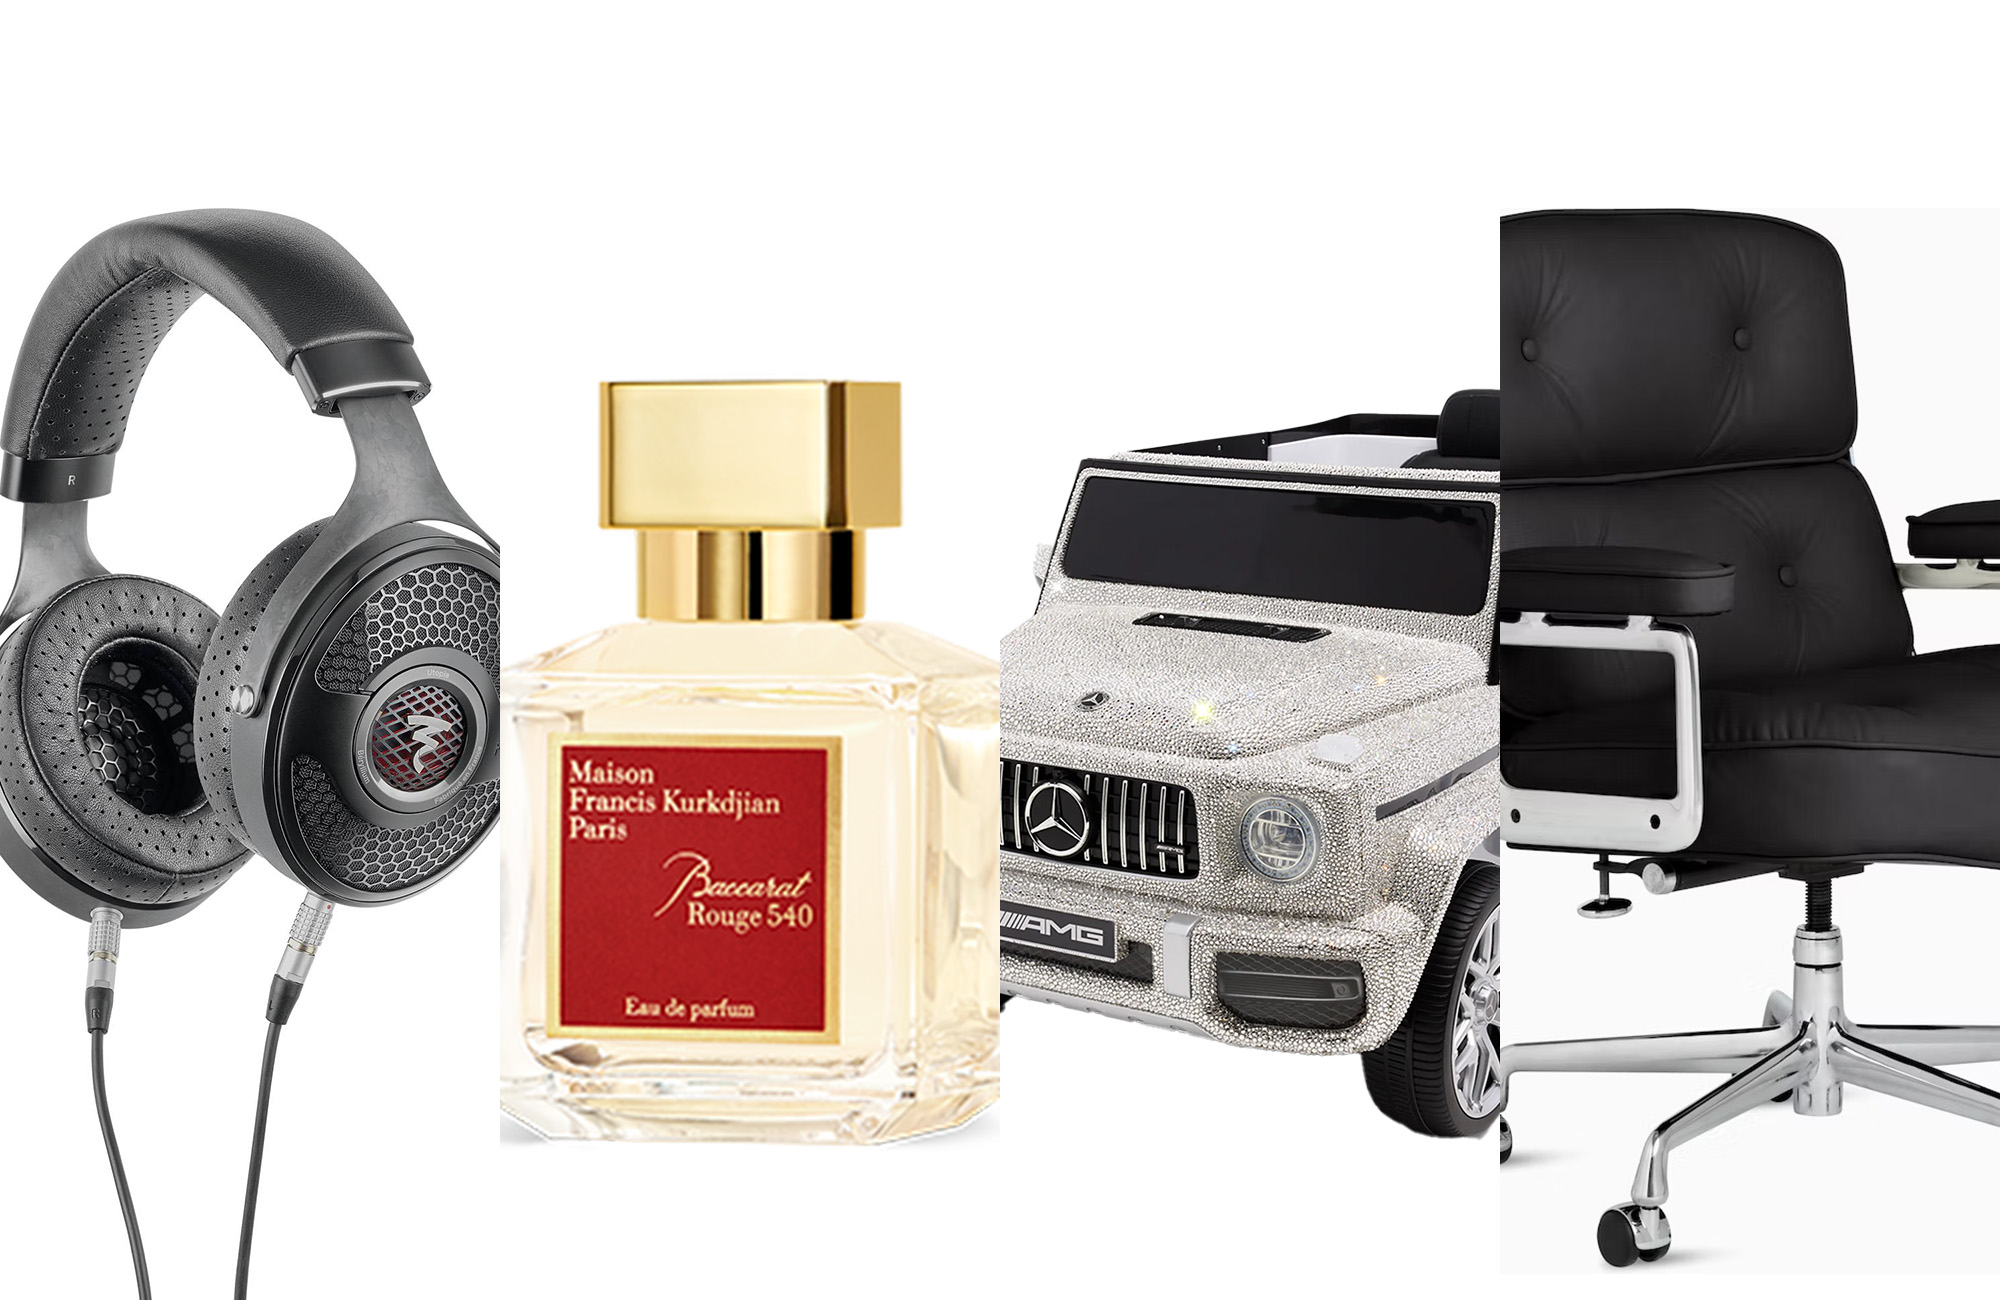 Indulgent gifts to blow them away (and blow your budget)